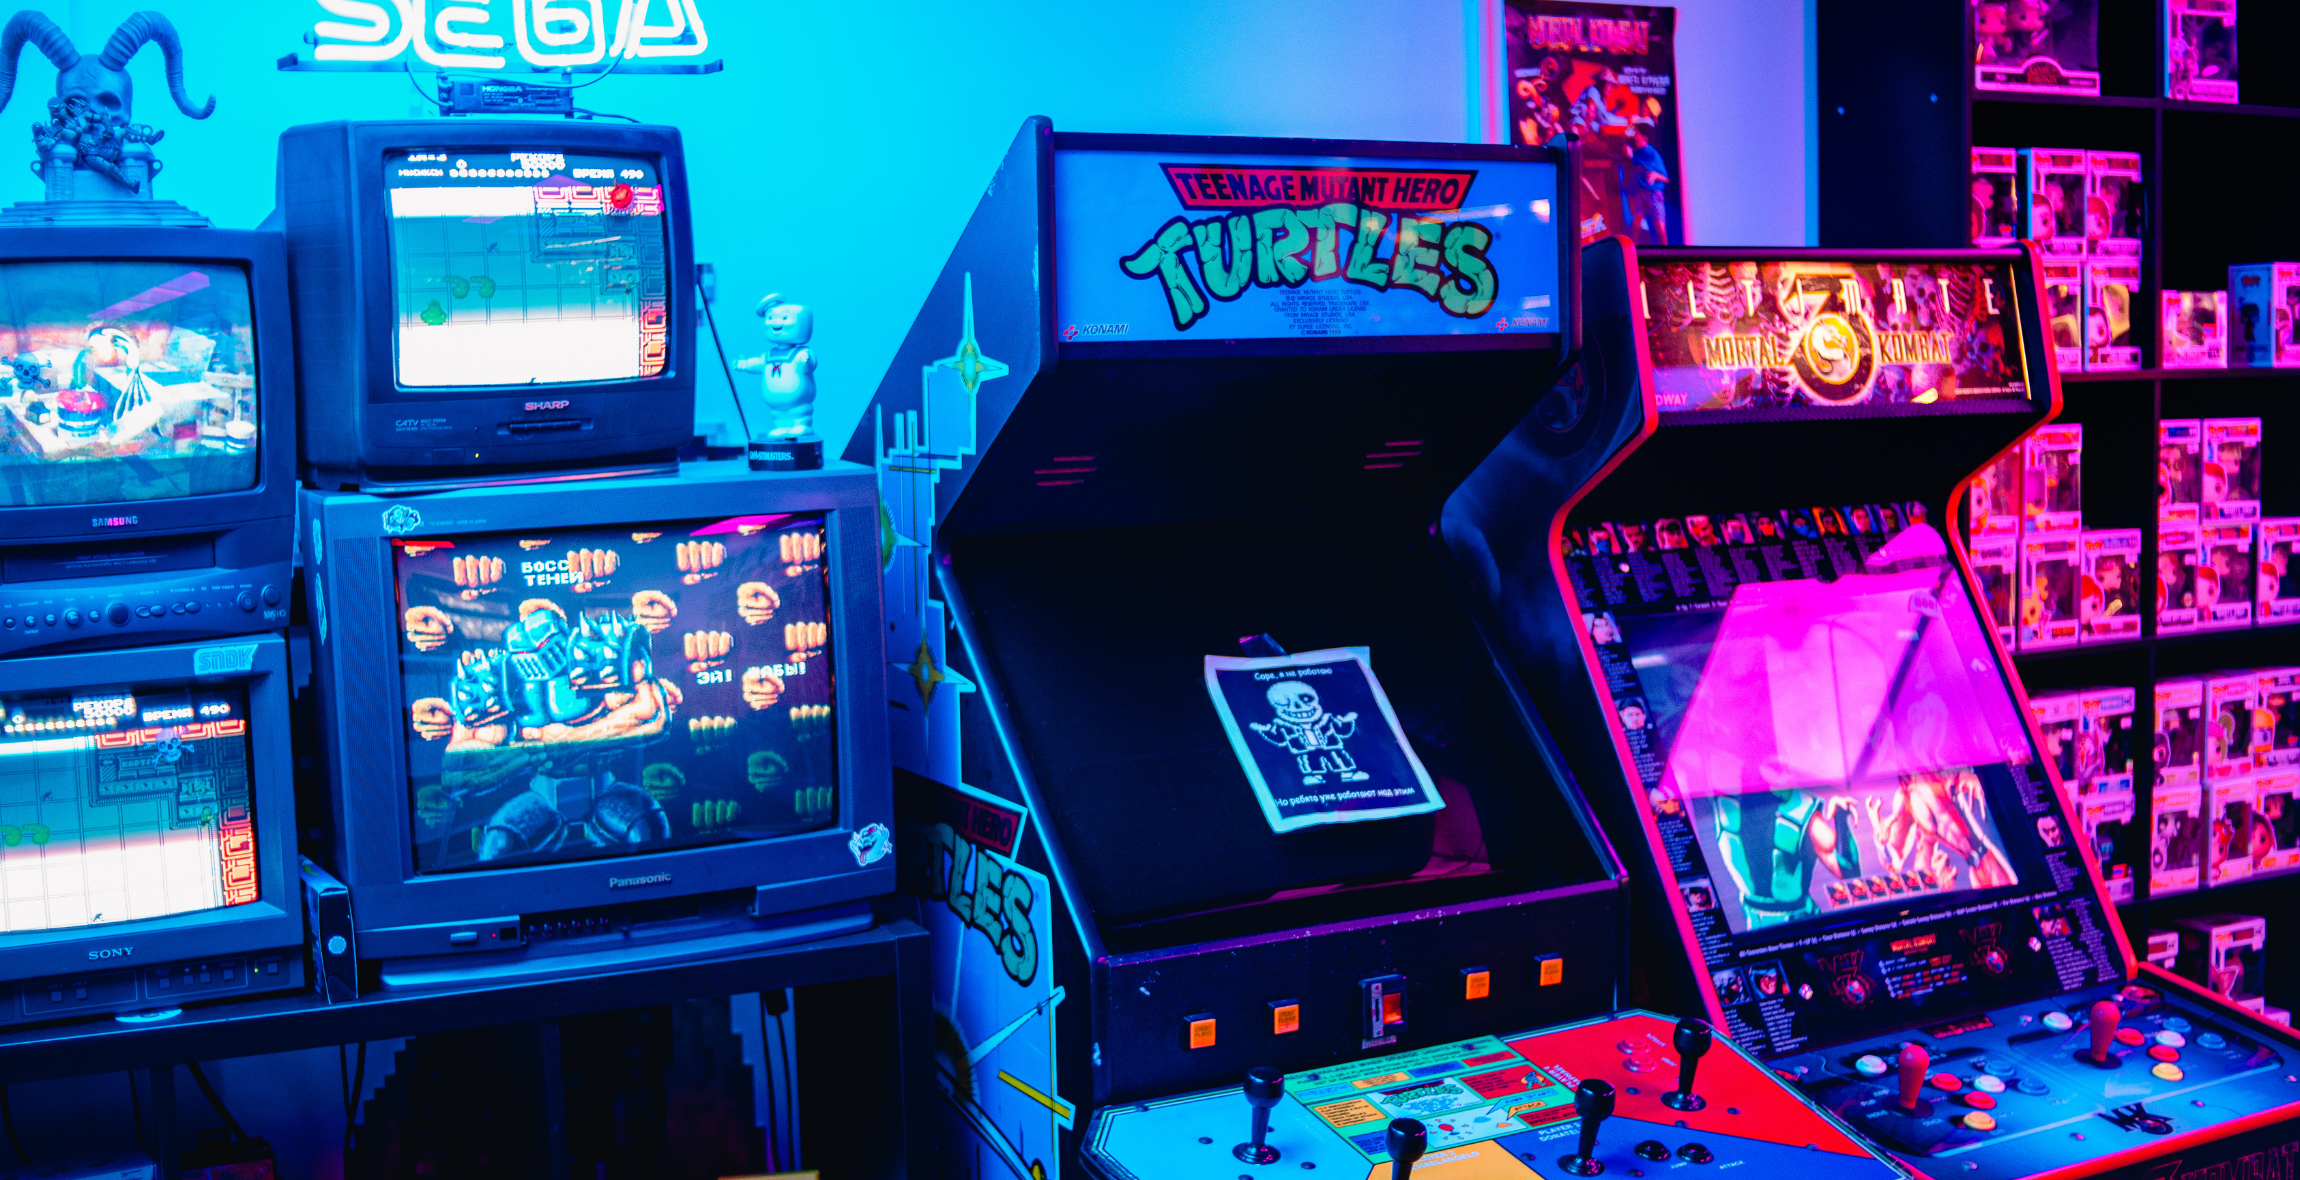 Video and Arcade games lined up in a neon lighted room